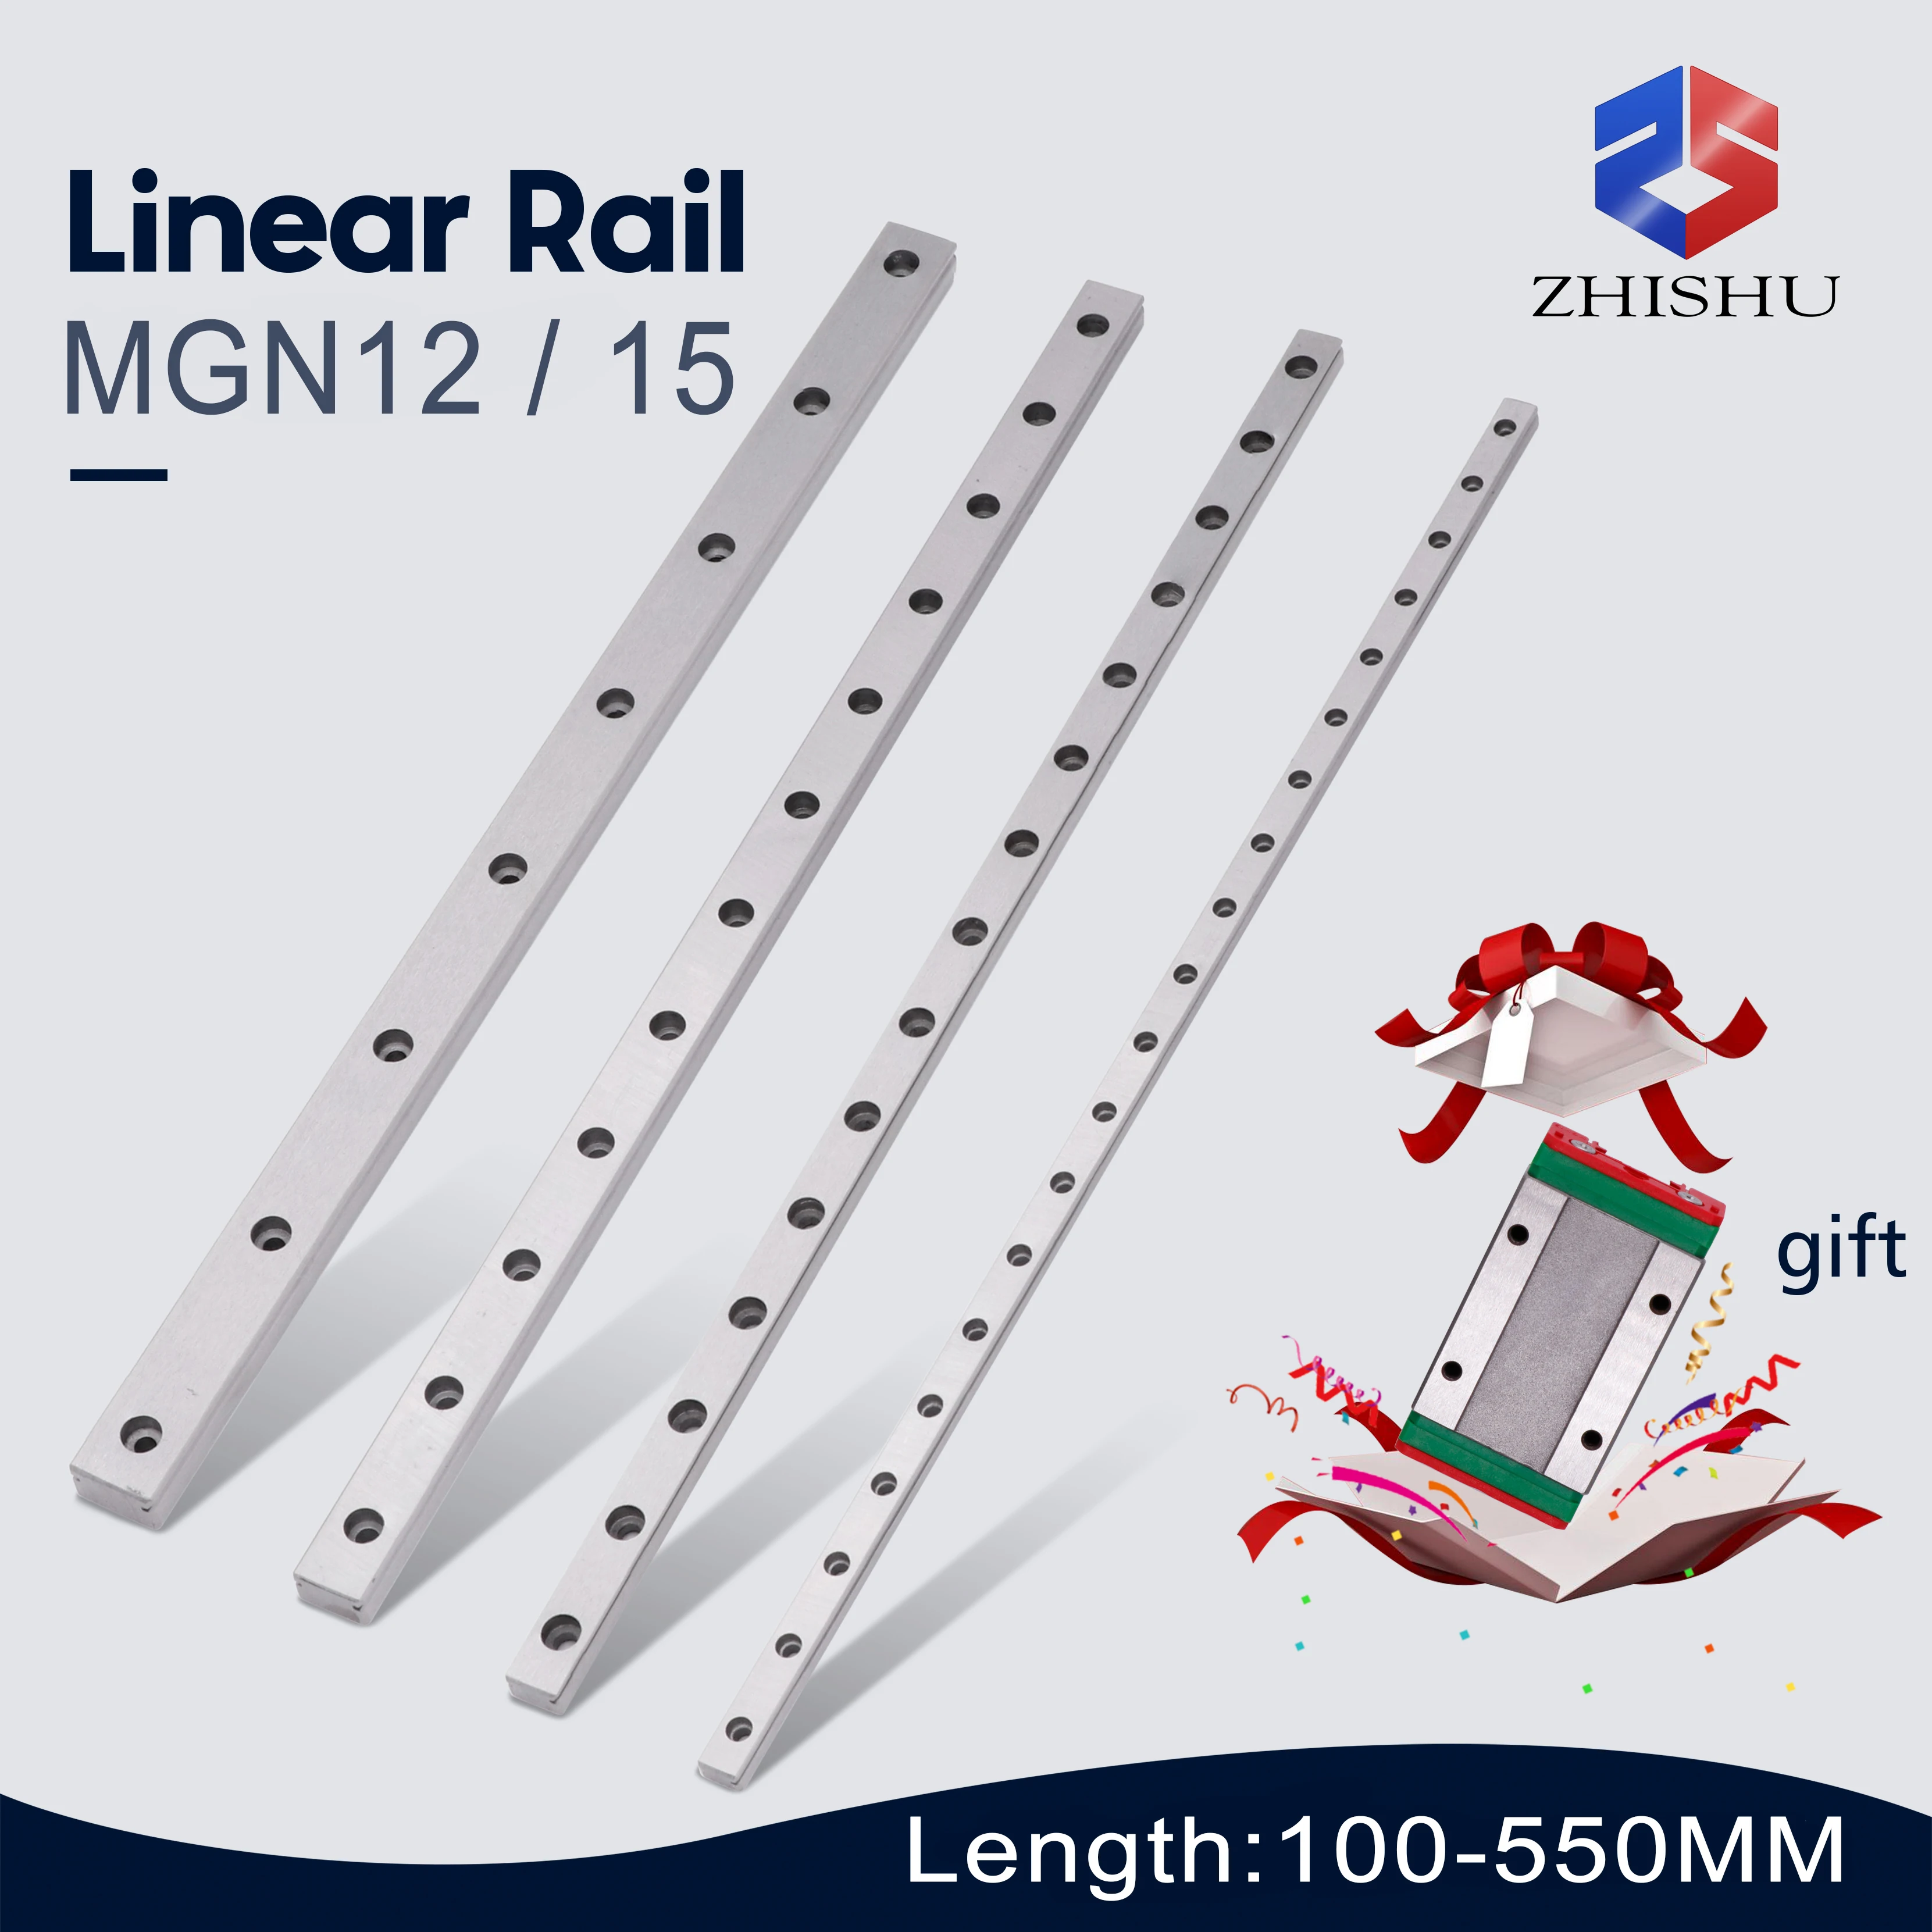 

MGN12 MGN15 MGN12C MGN15H 100 - 550 MM Slide Rail Guide 1PC MGN 12 Miniature Linear Guide Rail +Free 1PC MGN12H Square Carriages